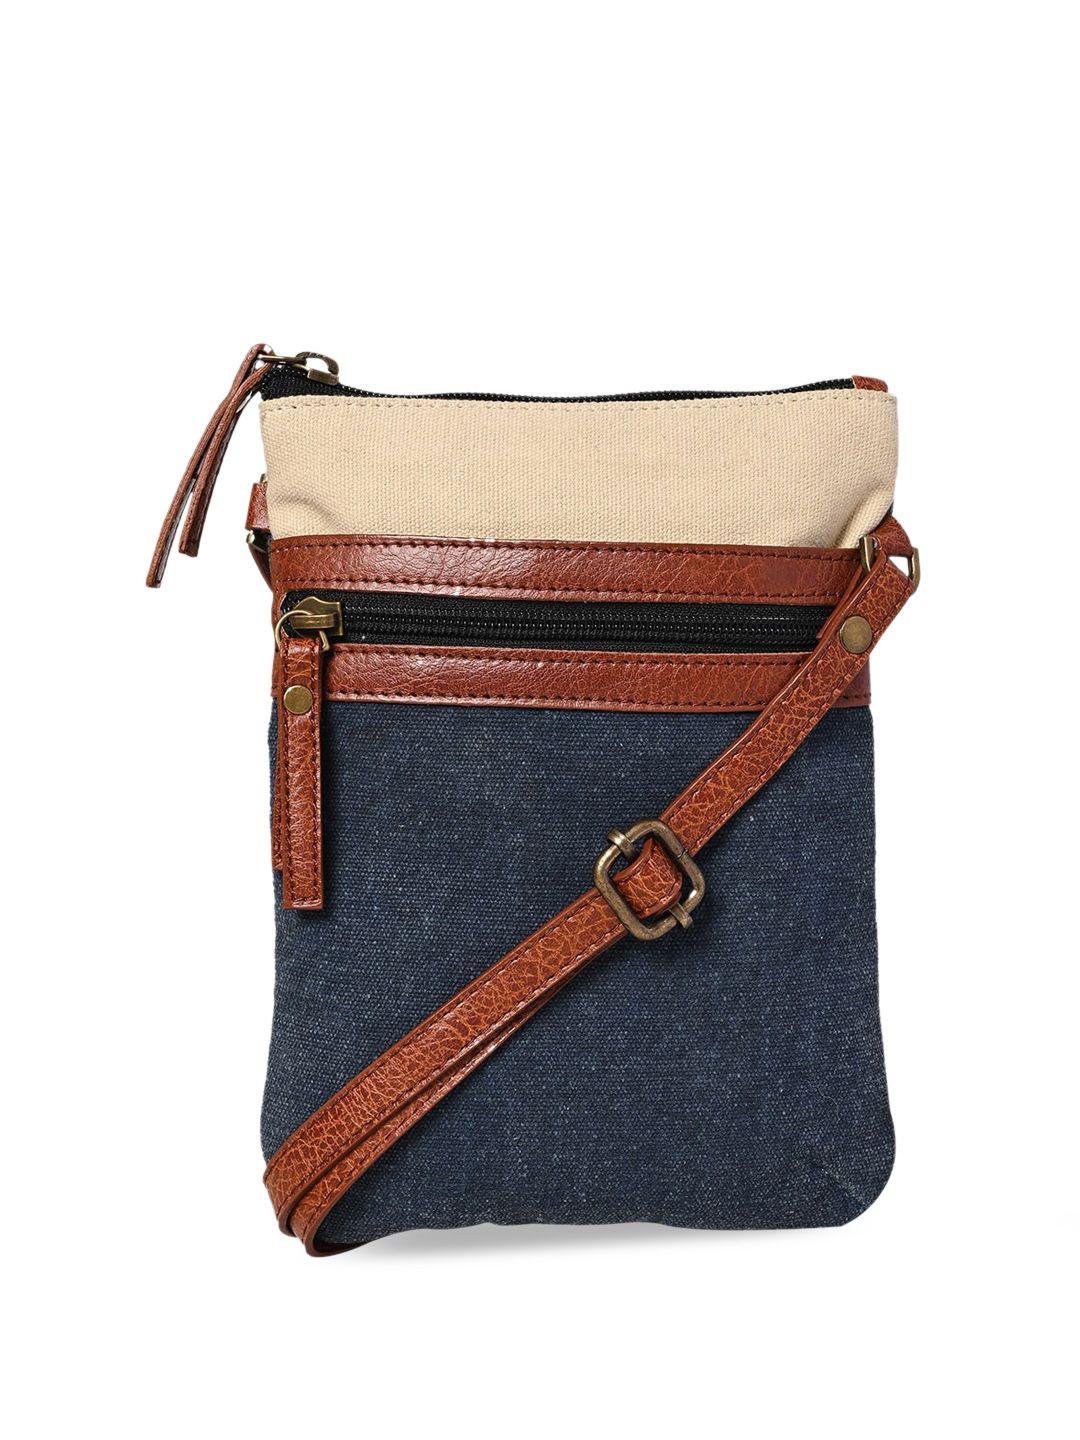 mona-b-navy-blue-structured-sling-bag-with-tasselled